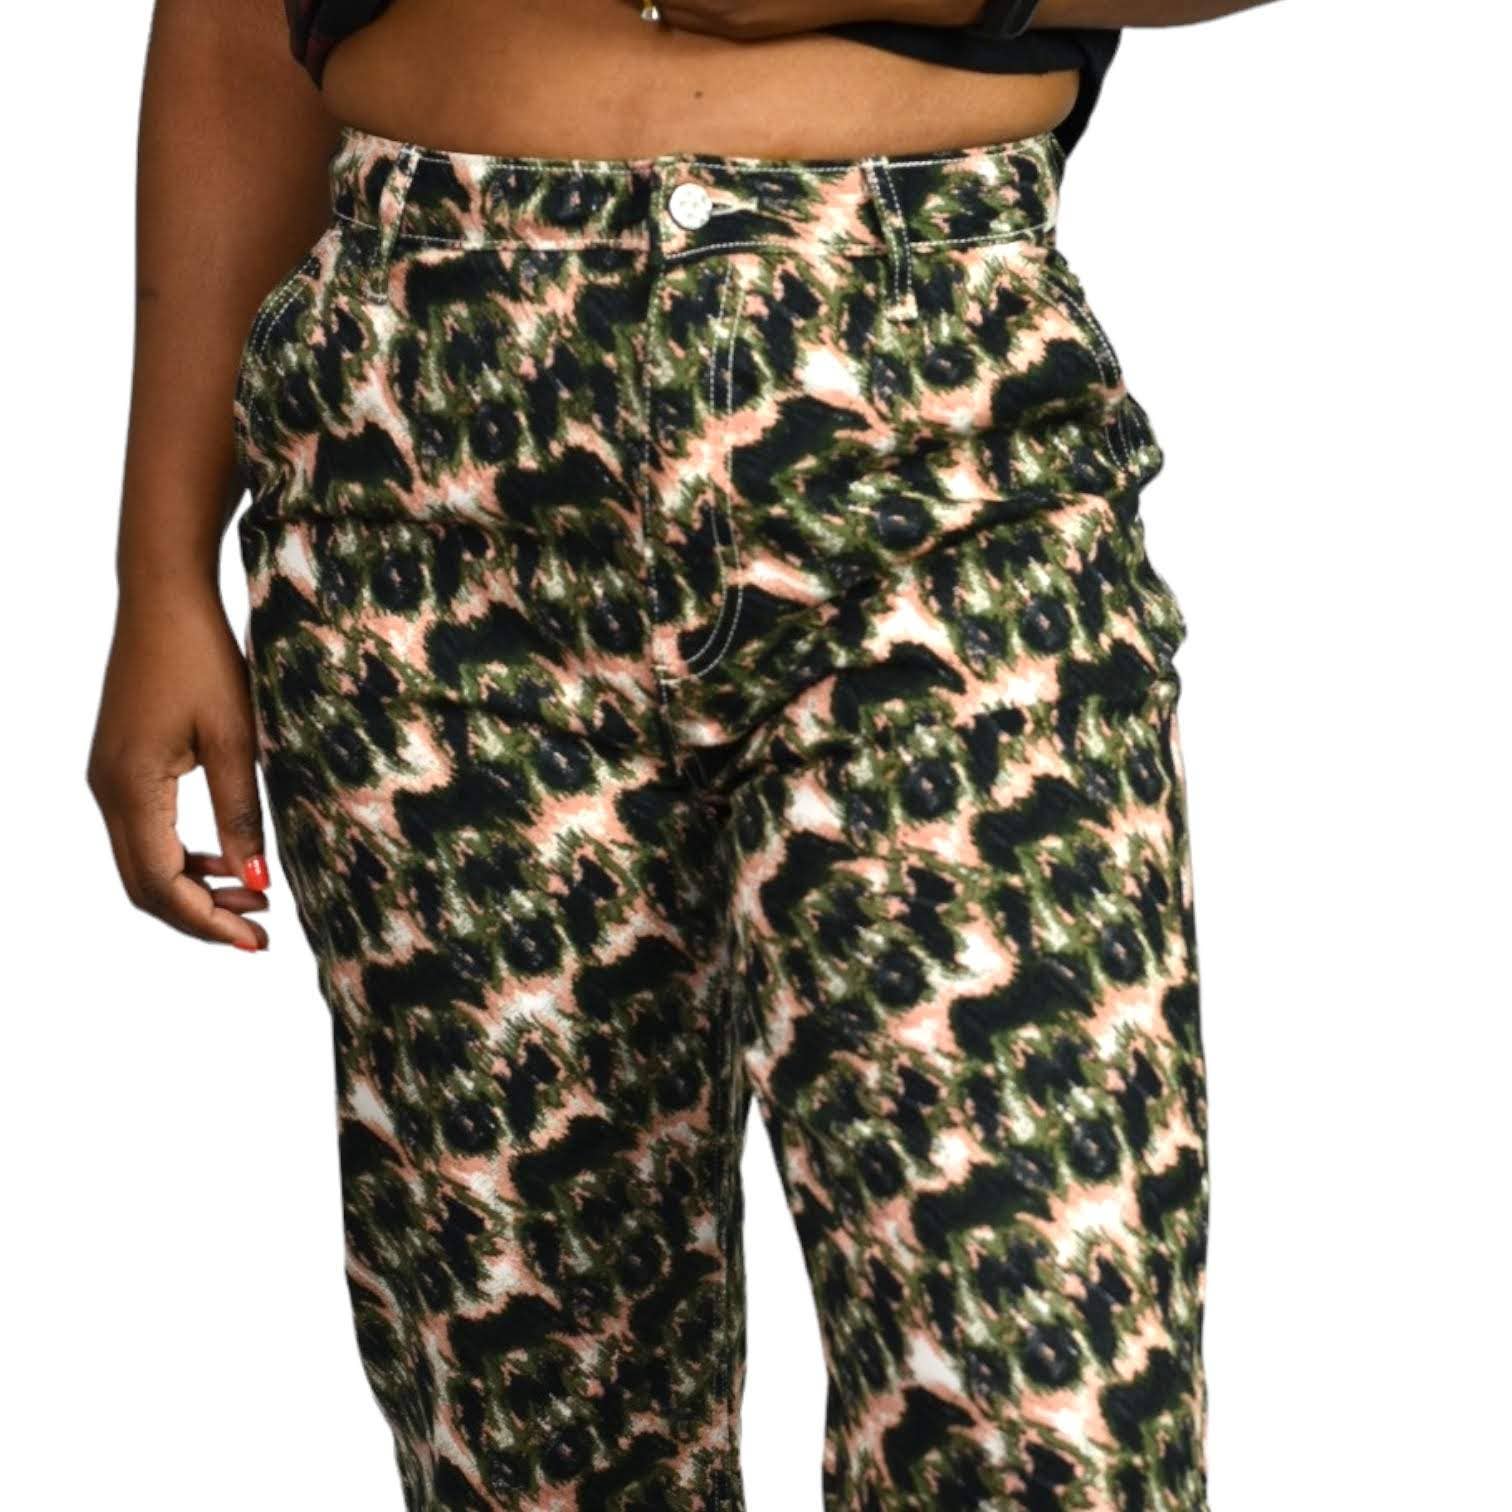 Rachel Comey Target Printed Jeans Tapered Green Abstract Animal High Waist Rigid Denim Size 4